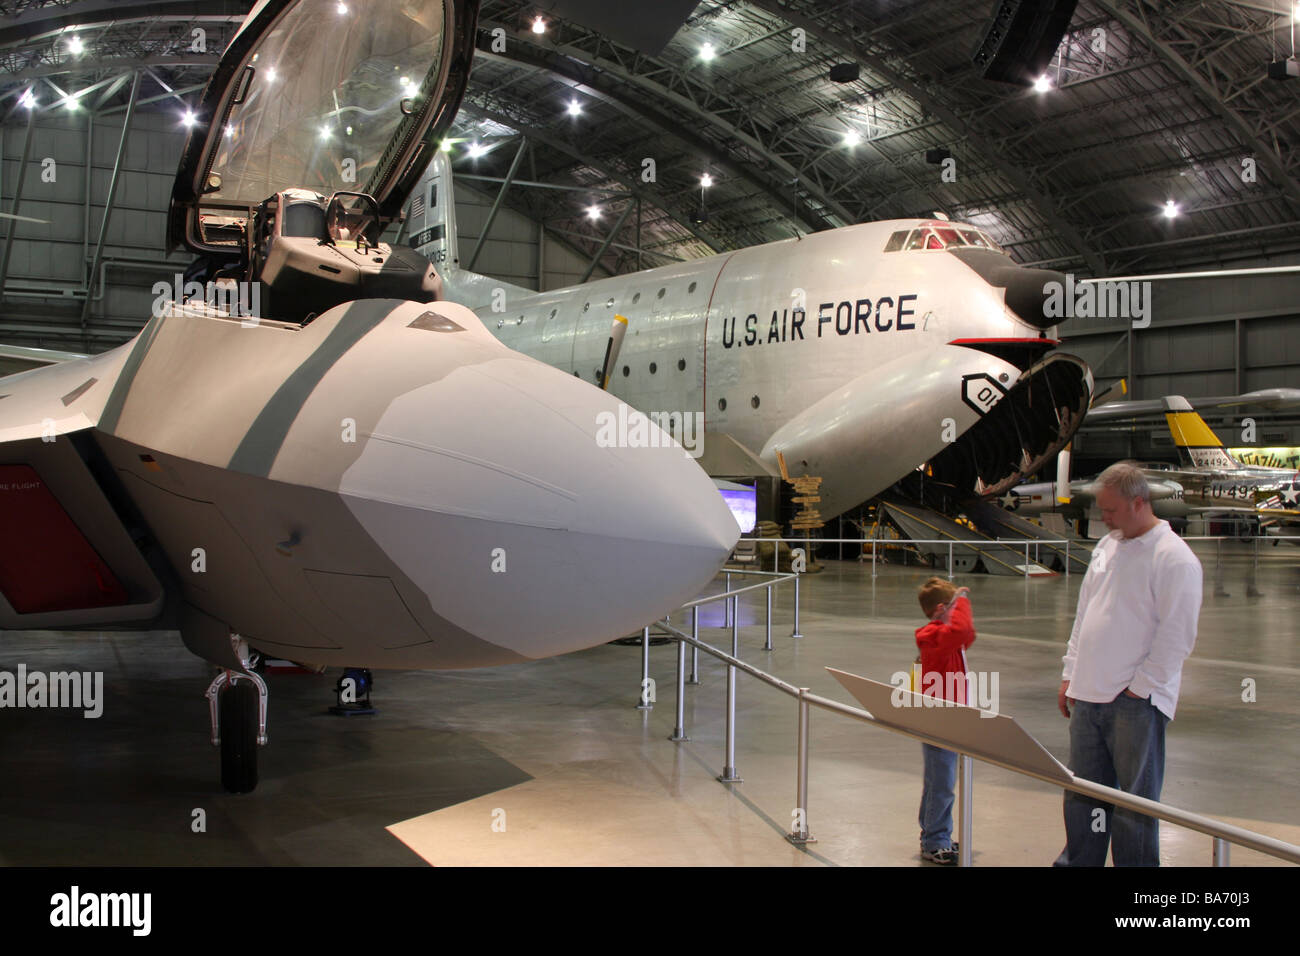 United States Air Force Museum Dayton, Ohio Wright Patterson Foto Stock